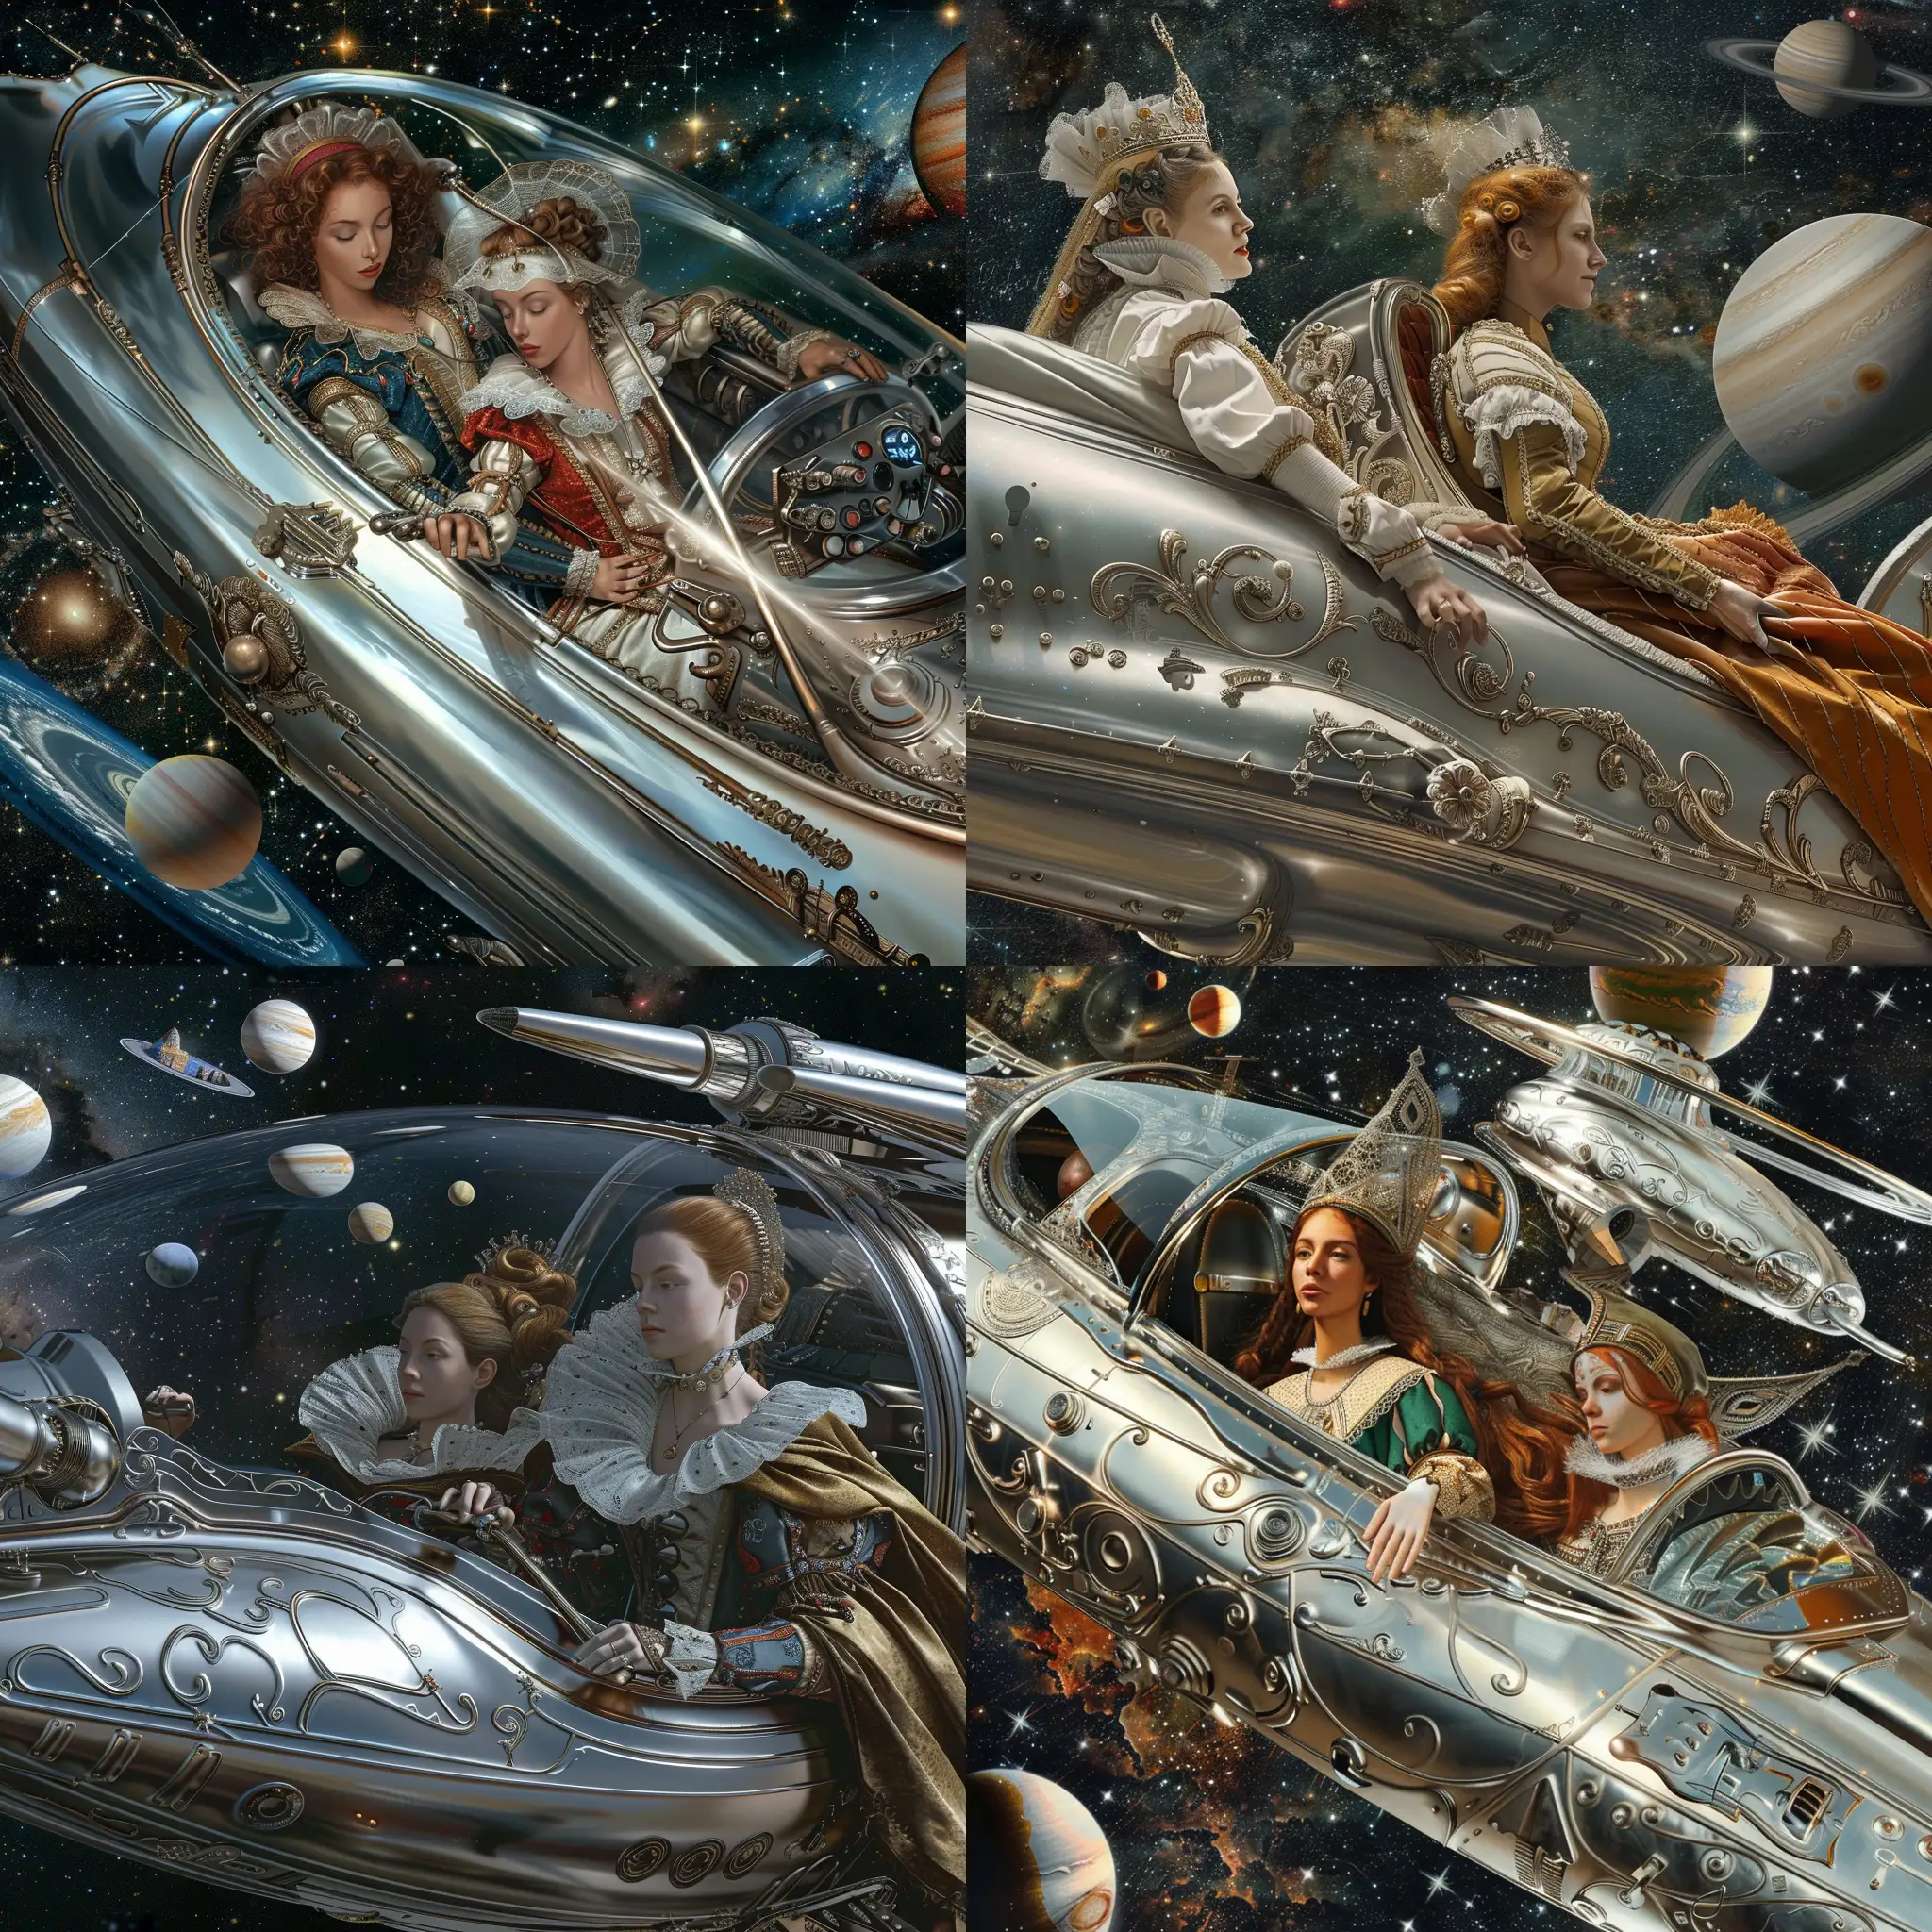 A highly detailed image of a beautiful Elizabethan couple piloting a futuristic silver spaceship .  The background is stars and planets. Beautiful magical mysterious fantasy surreal highly detailed